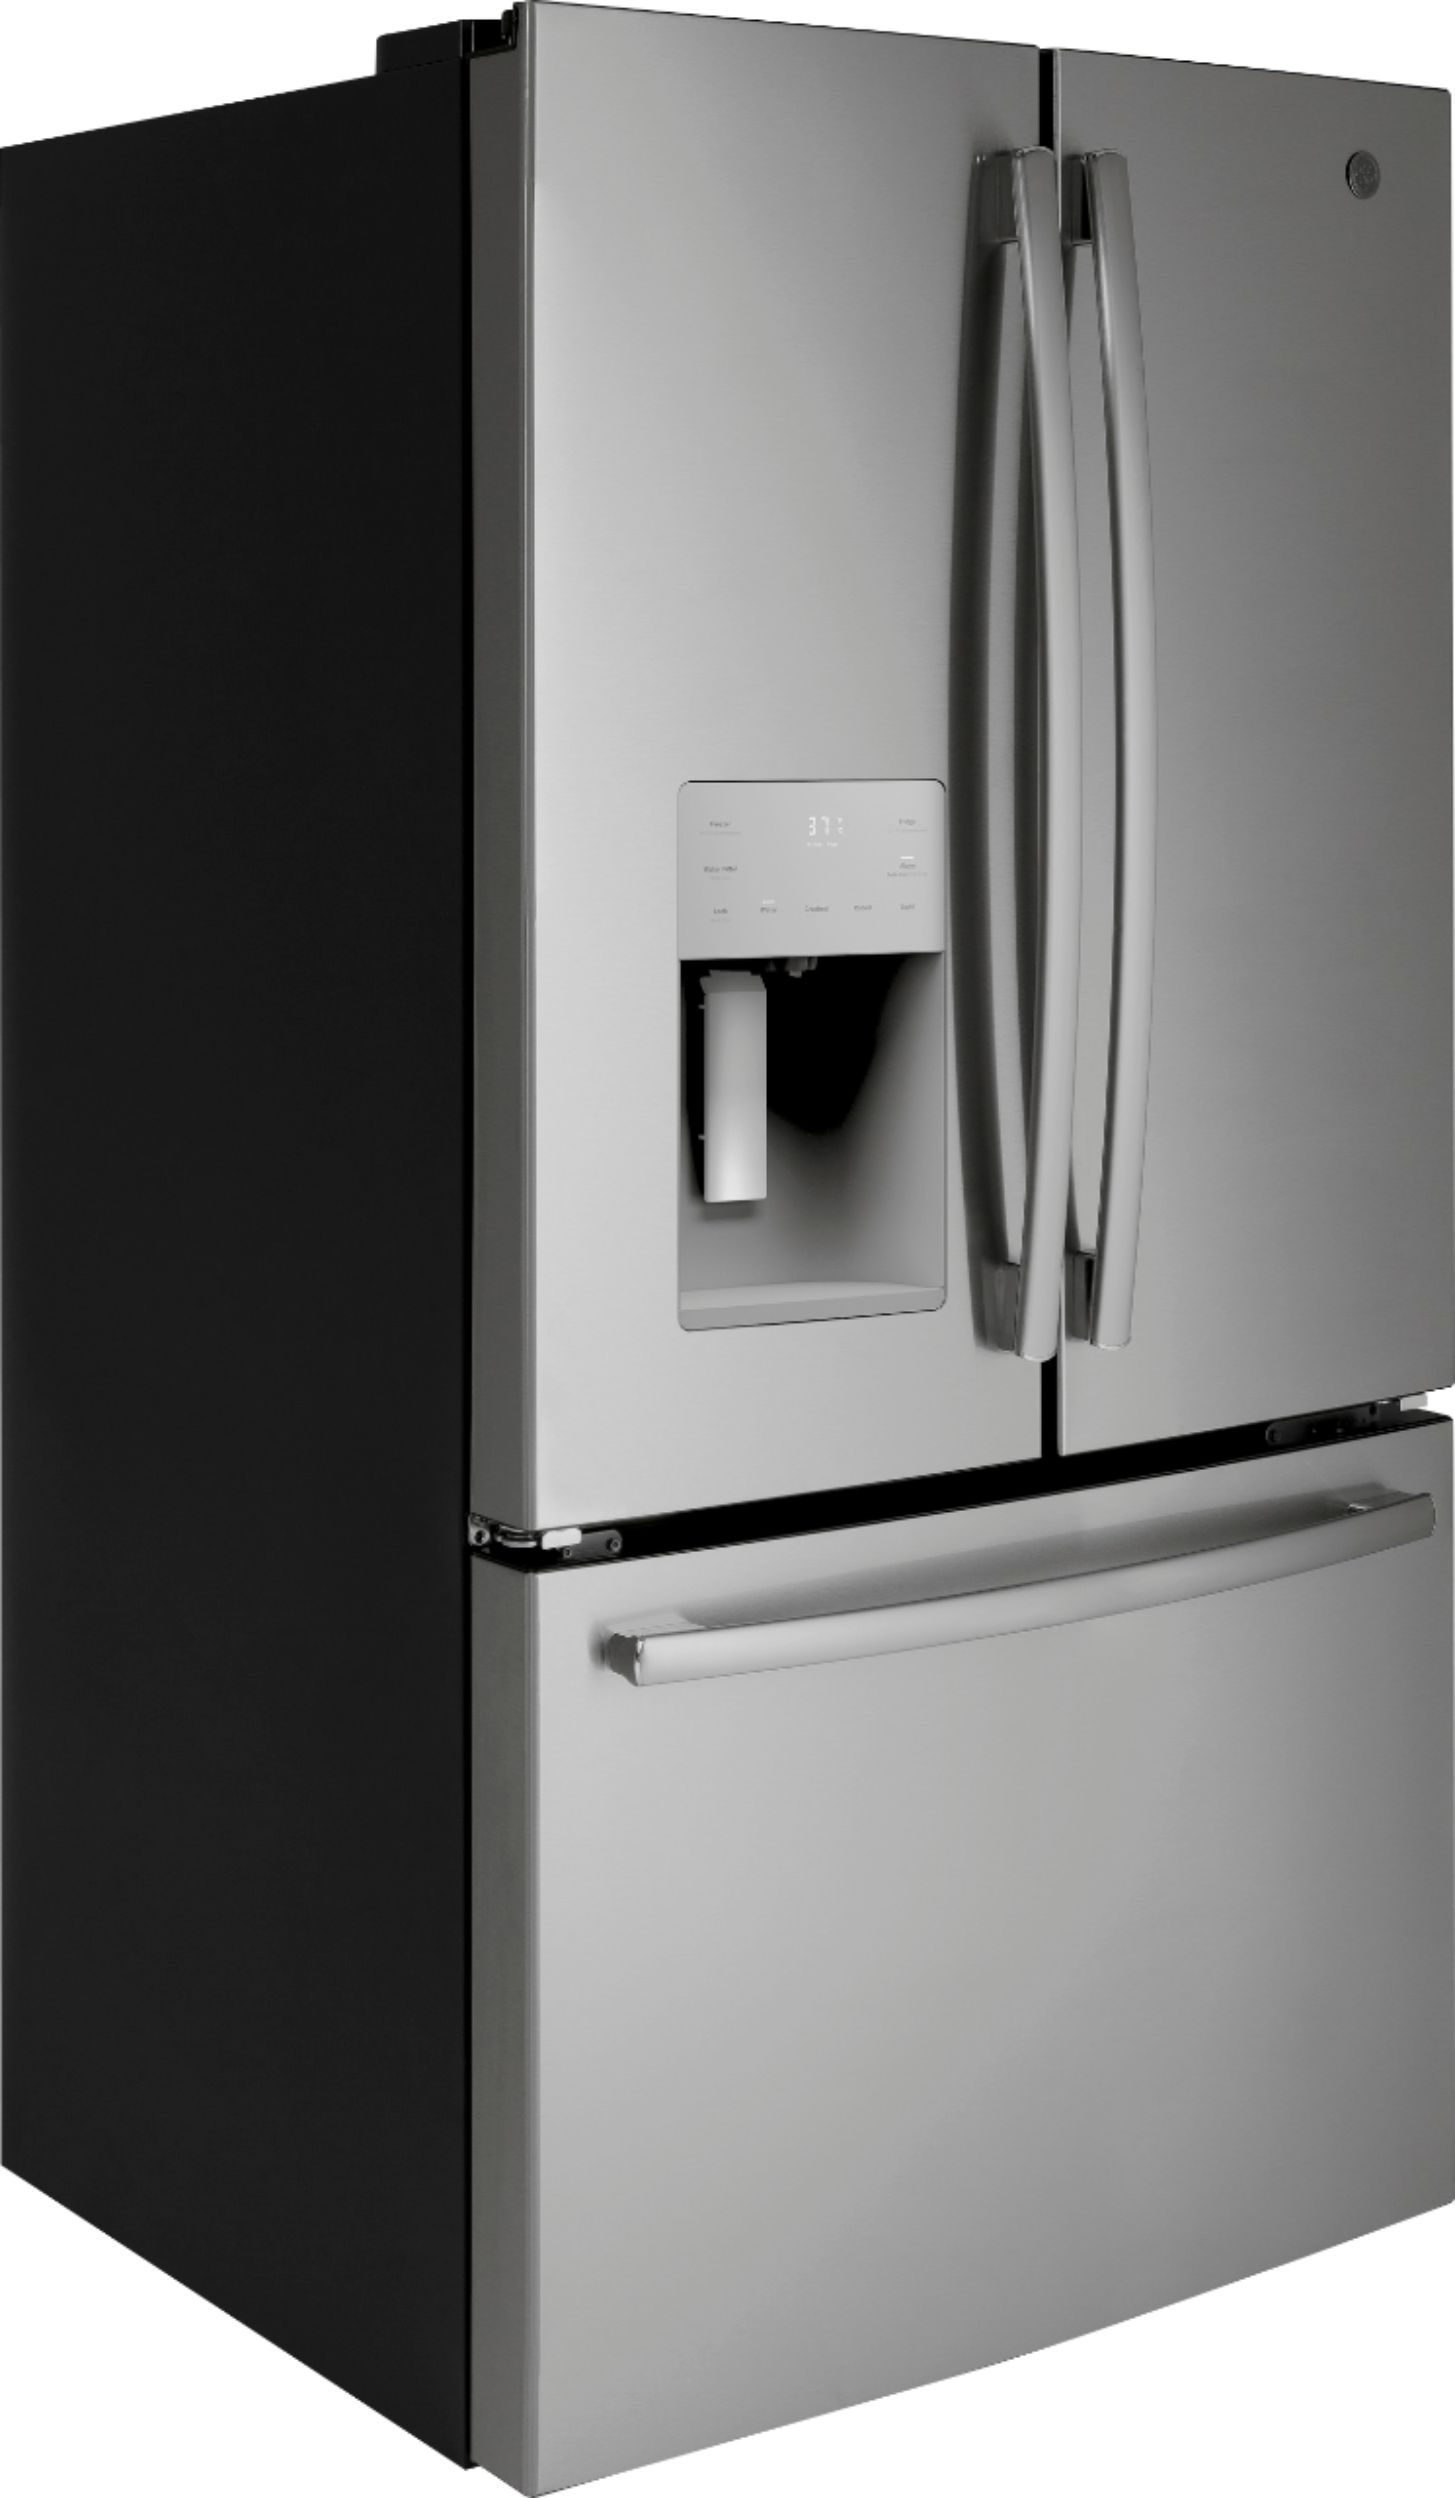 Angle View: GE - 25.5 Cu. Ft. French Door Refrigerator - Stainless steel